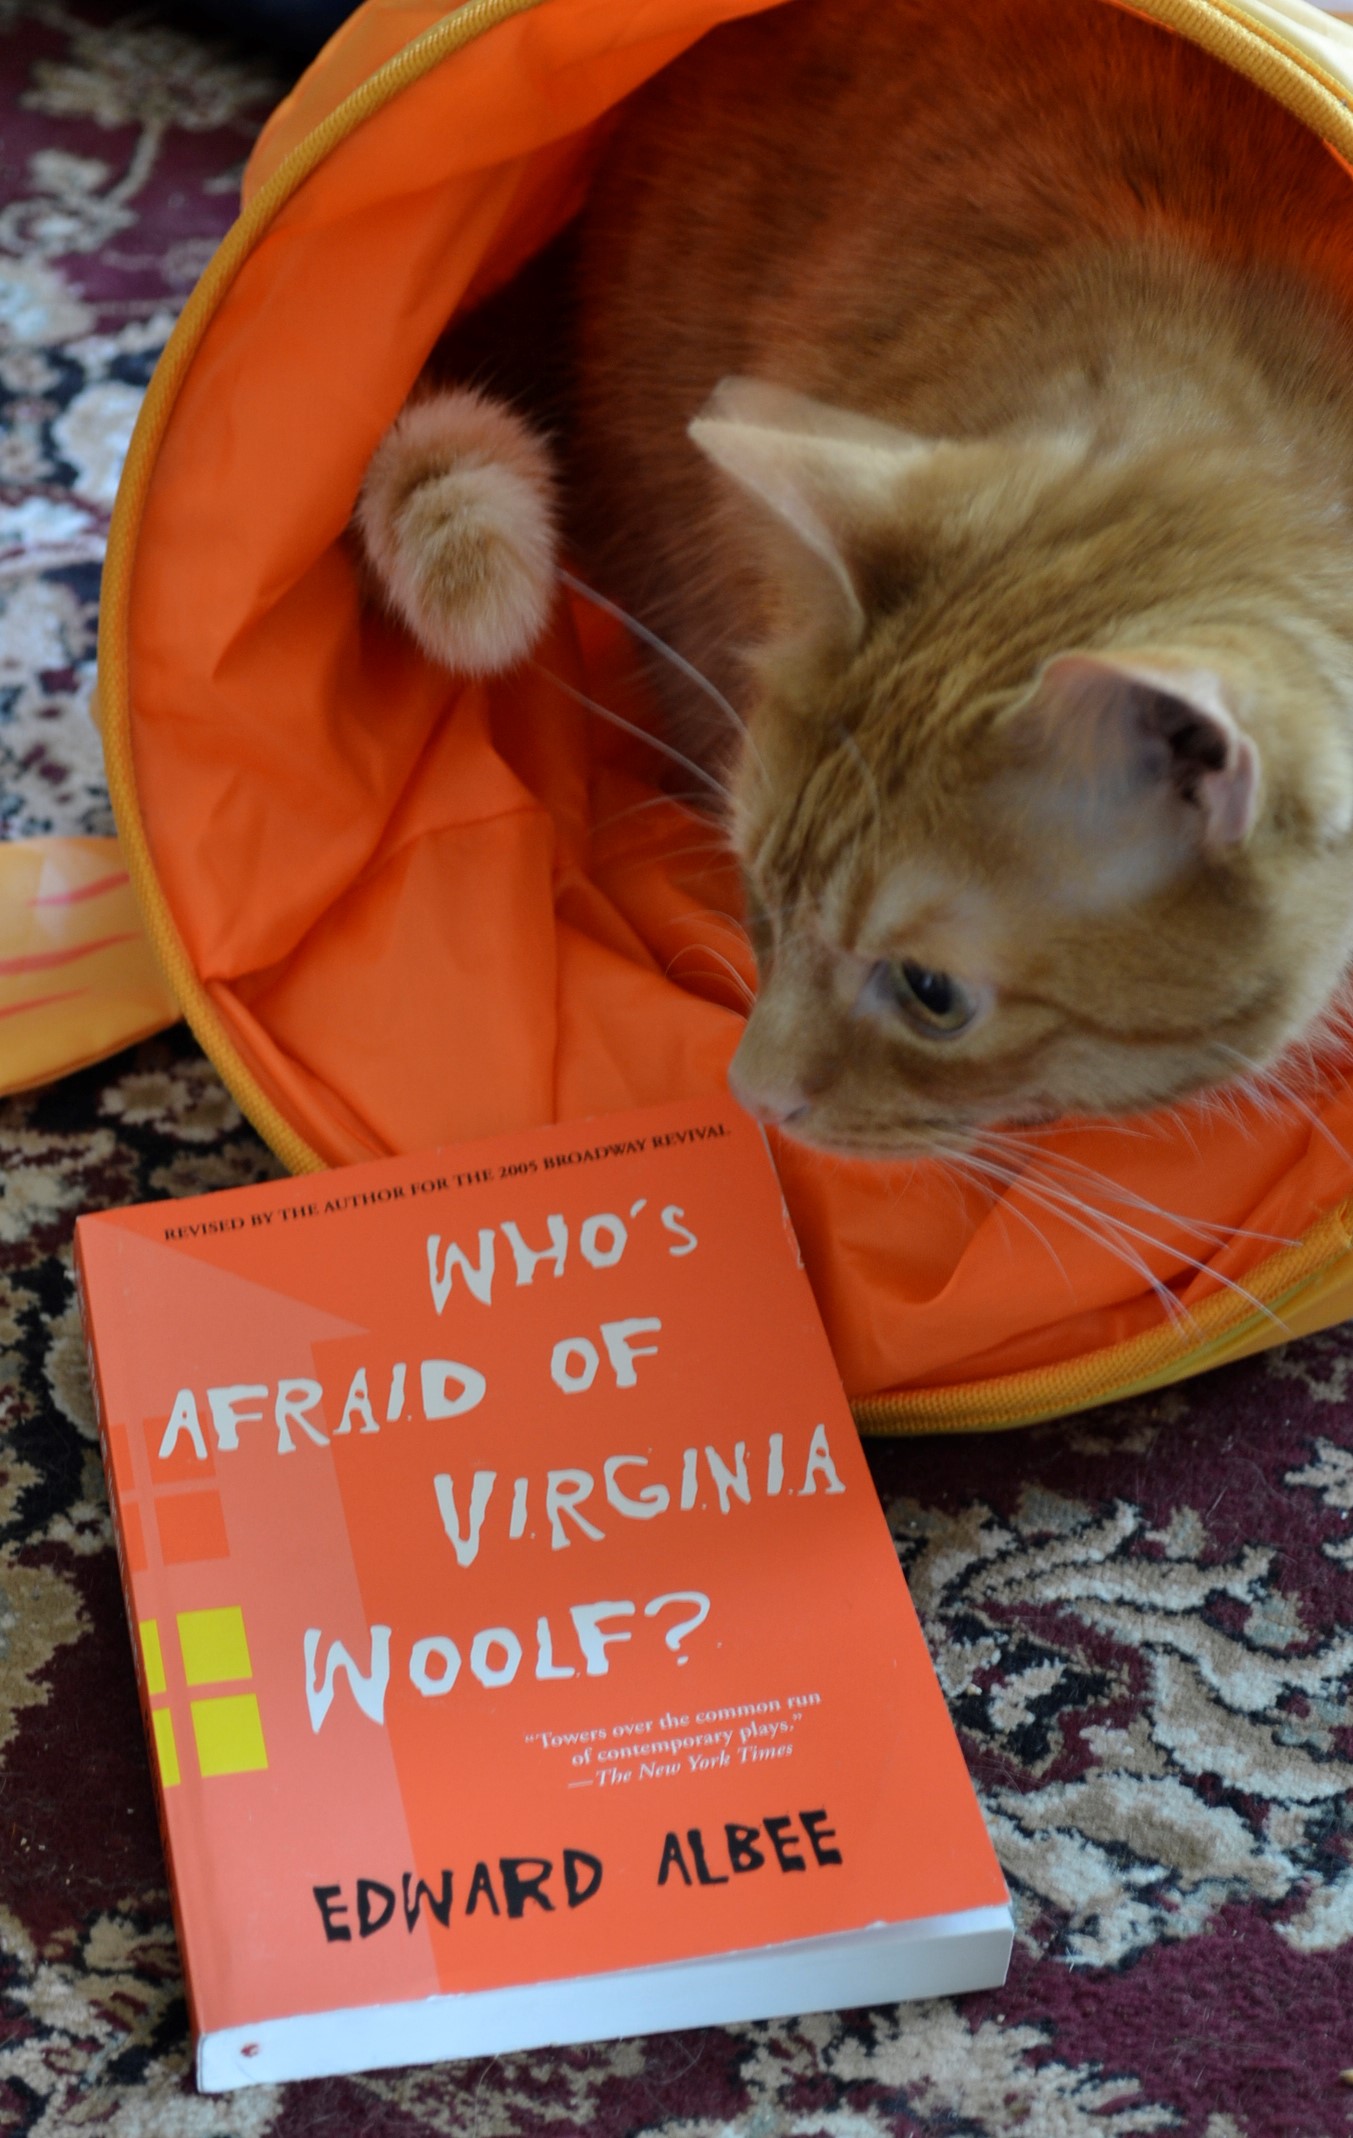 An orange tabby hides in a fish-shaped crinkle tunnel beside an orange book.